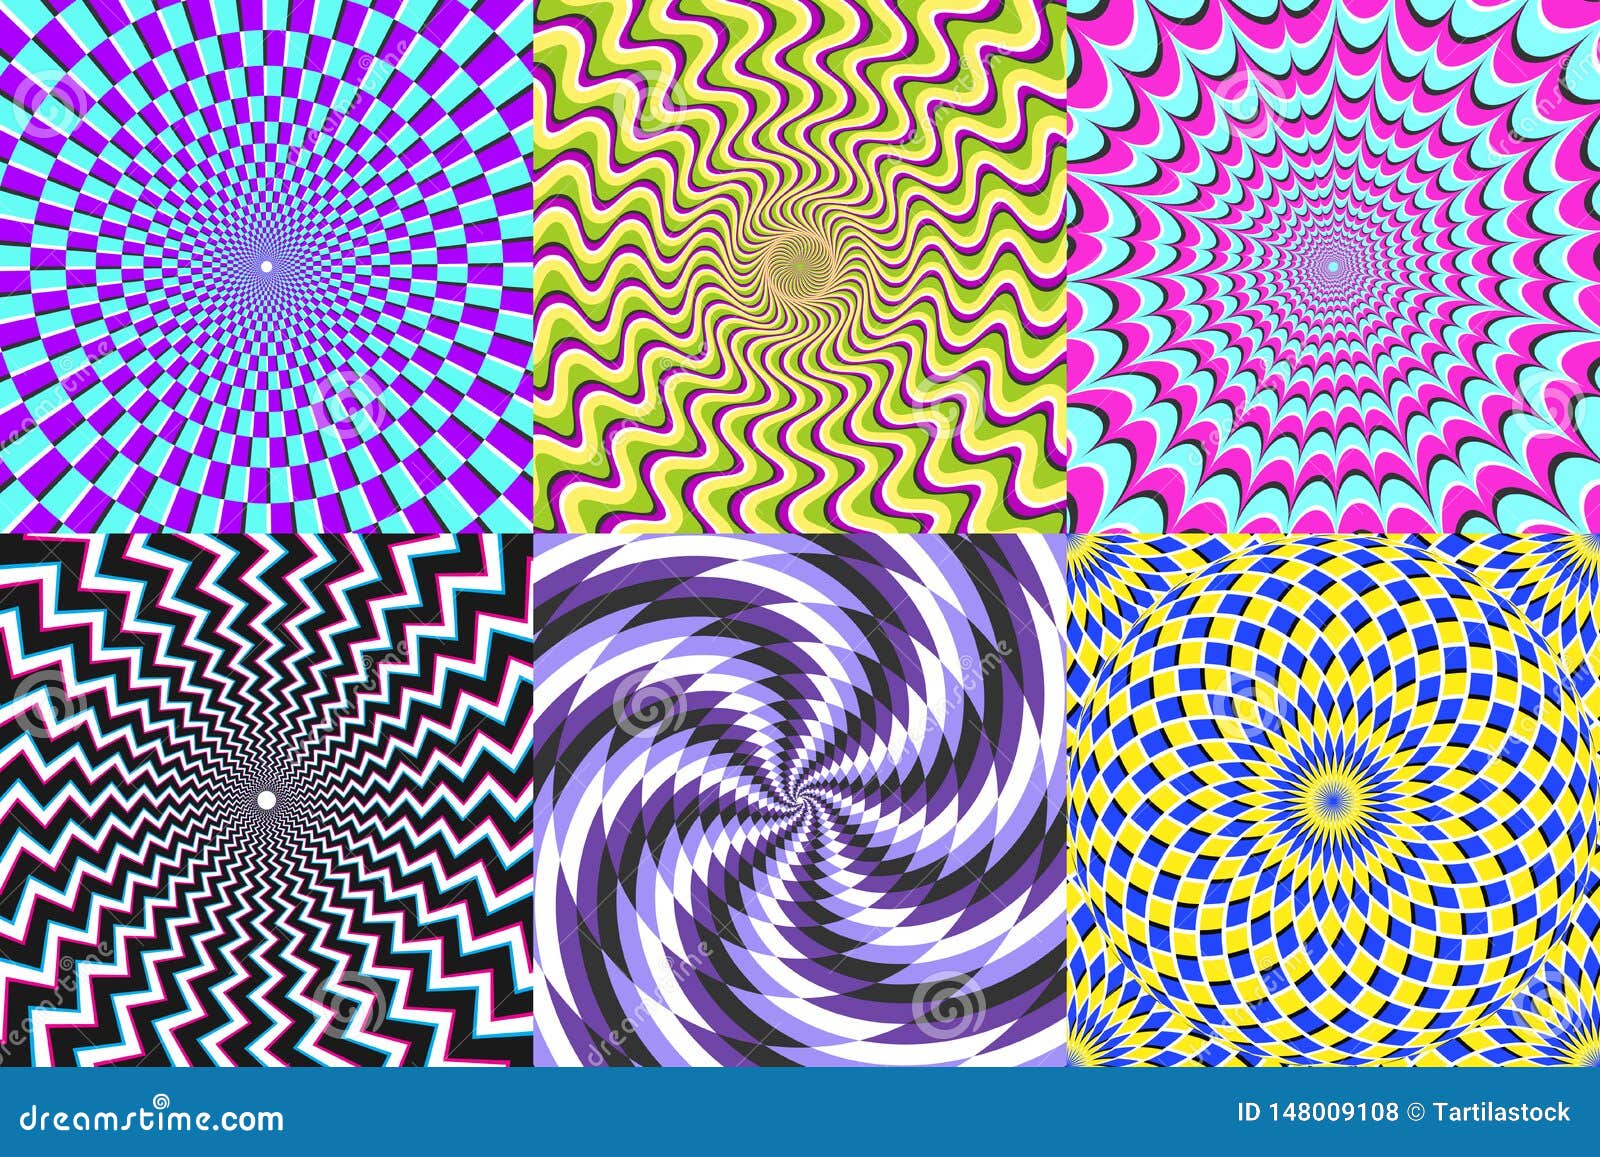 psychedelic spiral. optical illusion, delusion spirals and colorful abstraction hypnosis spiral   set